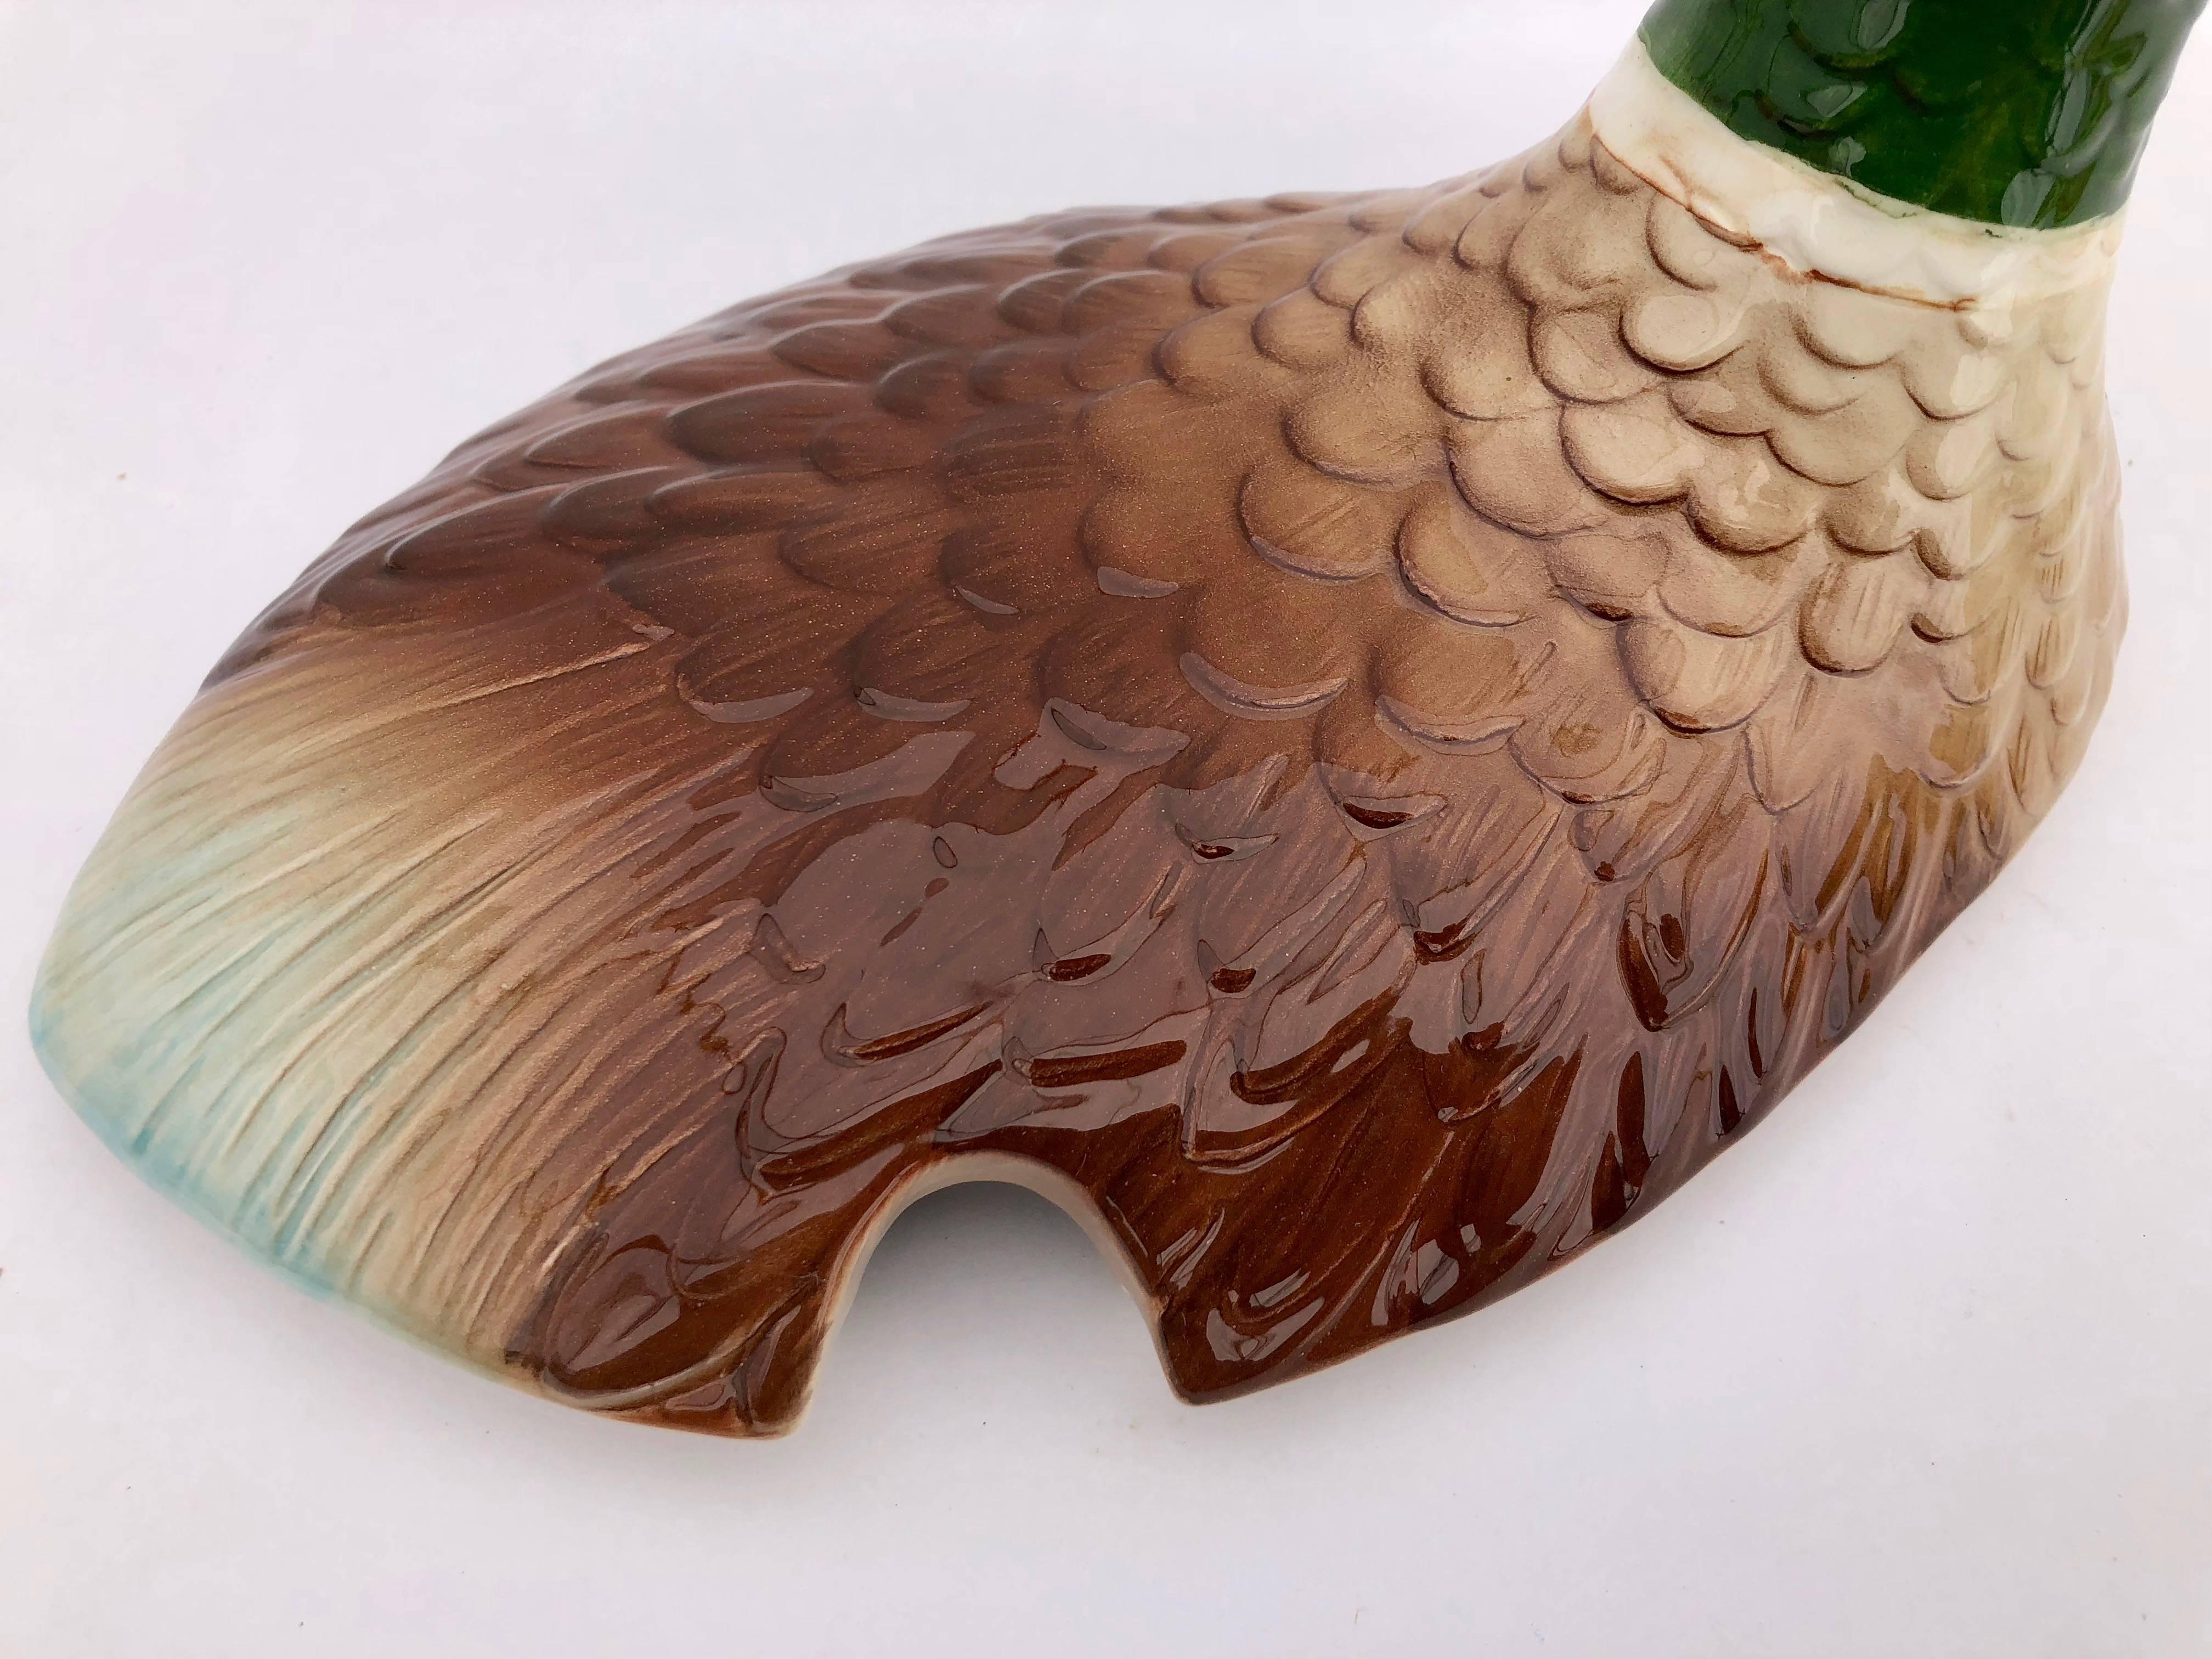 Pheasant Ceramic Soup Tureen Handcrafted by Otagiri, Japan, 1984 For Sale 1